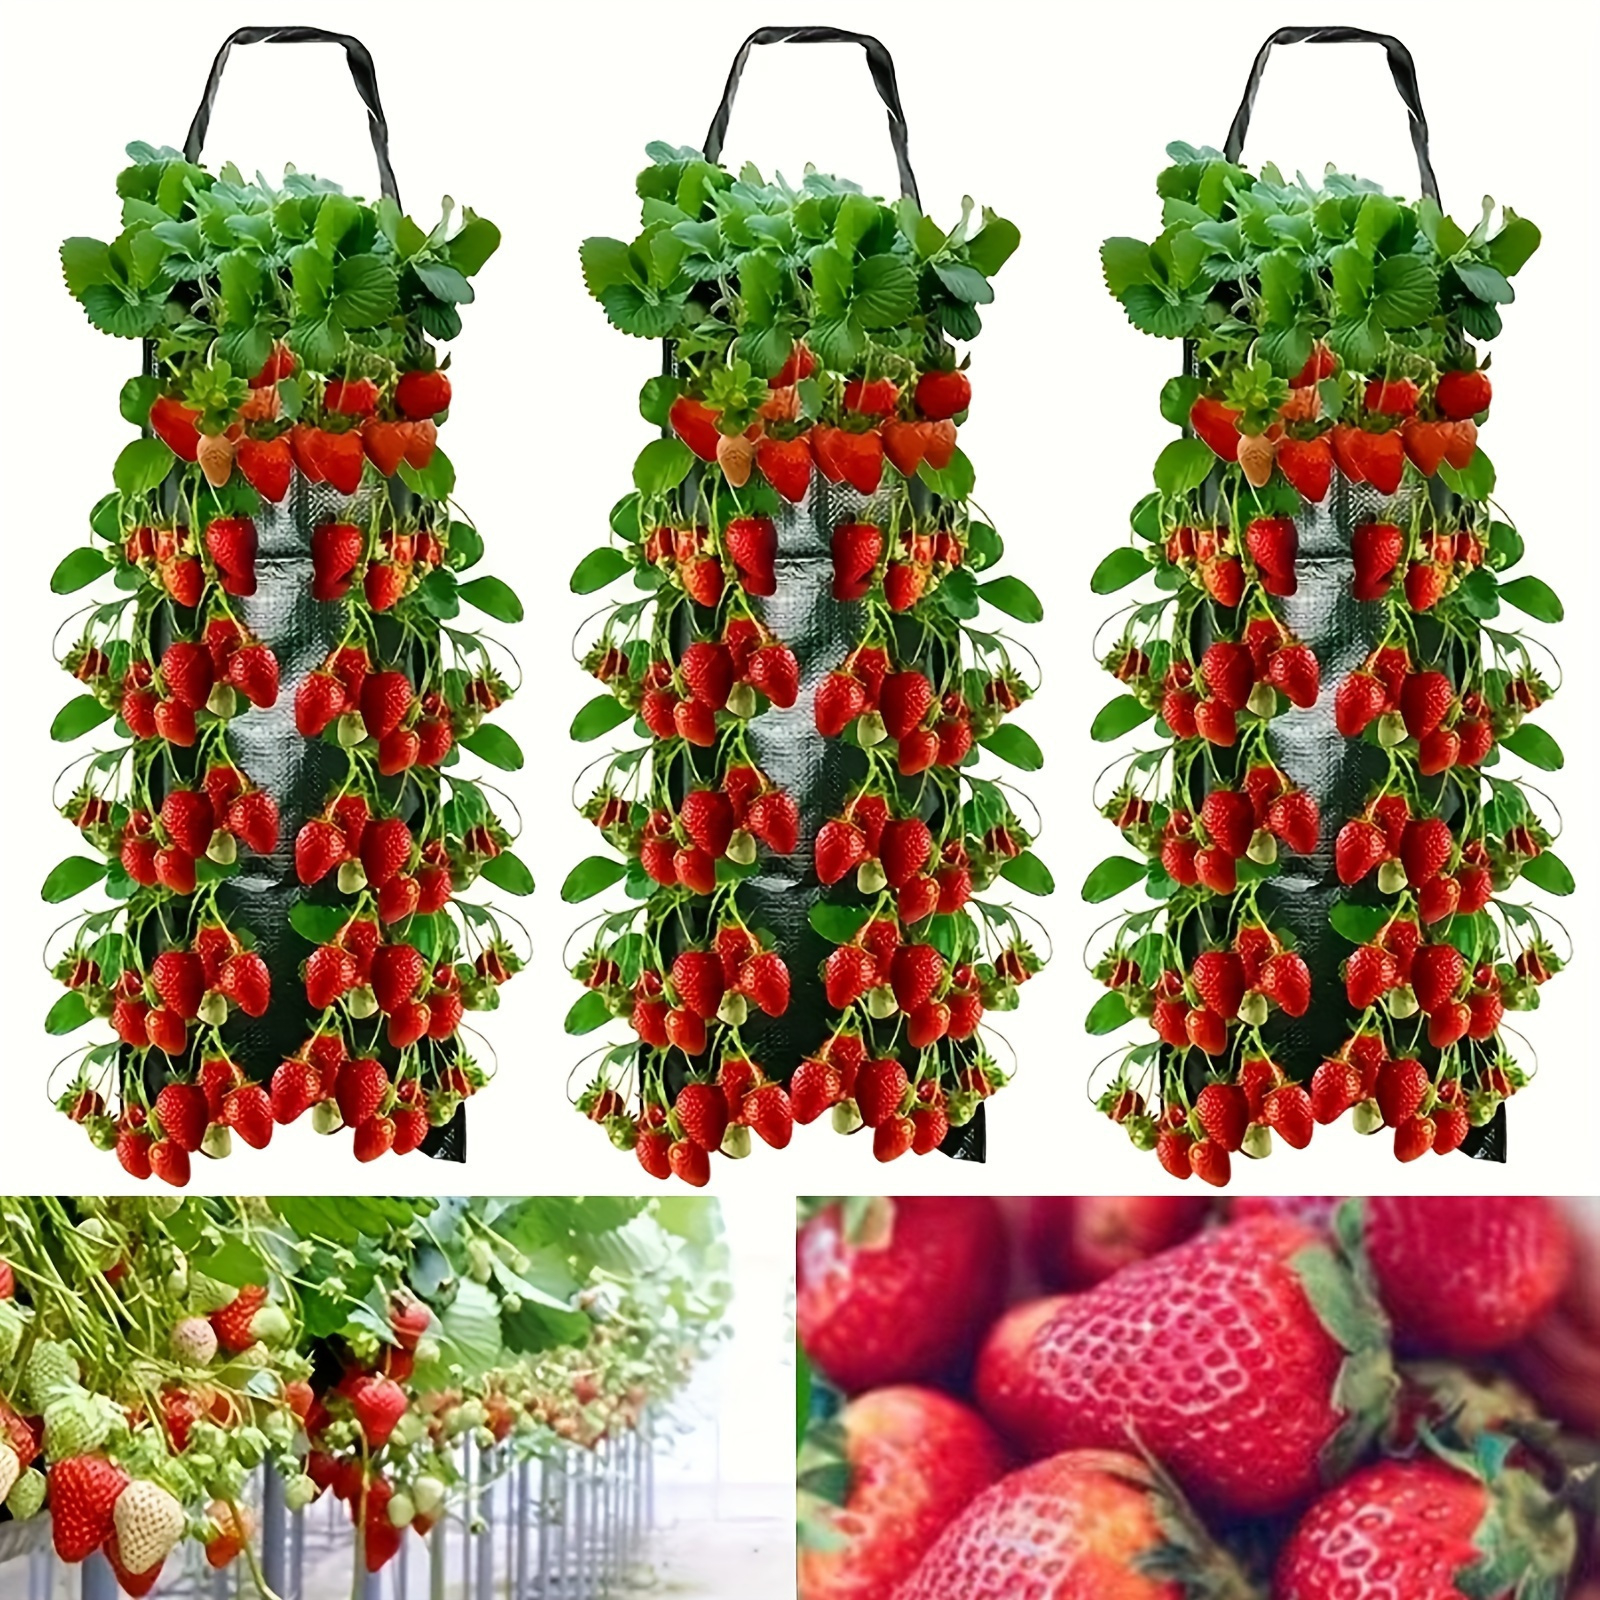 

Hanging Strawberry Planter Bag - Contemporary Style 3-tier Pe Hanging Strawberry Grow Bag With 8 Holes For Strawberry, Tomato, Pepper Planting - Garden Planting Container Accessory